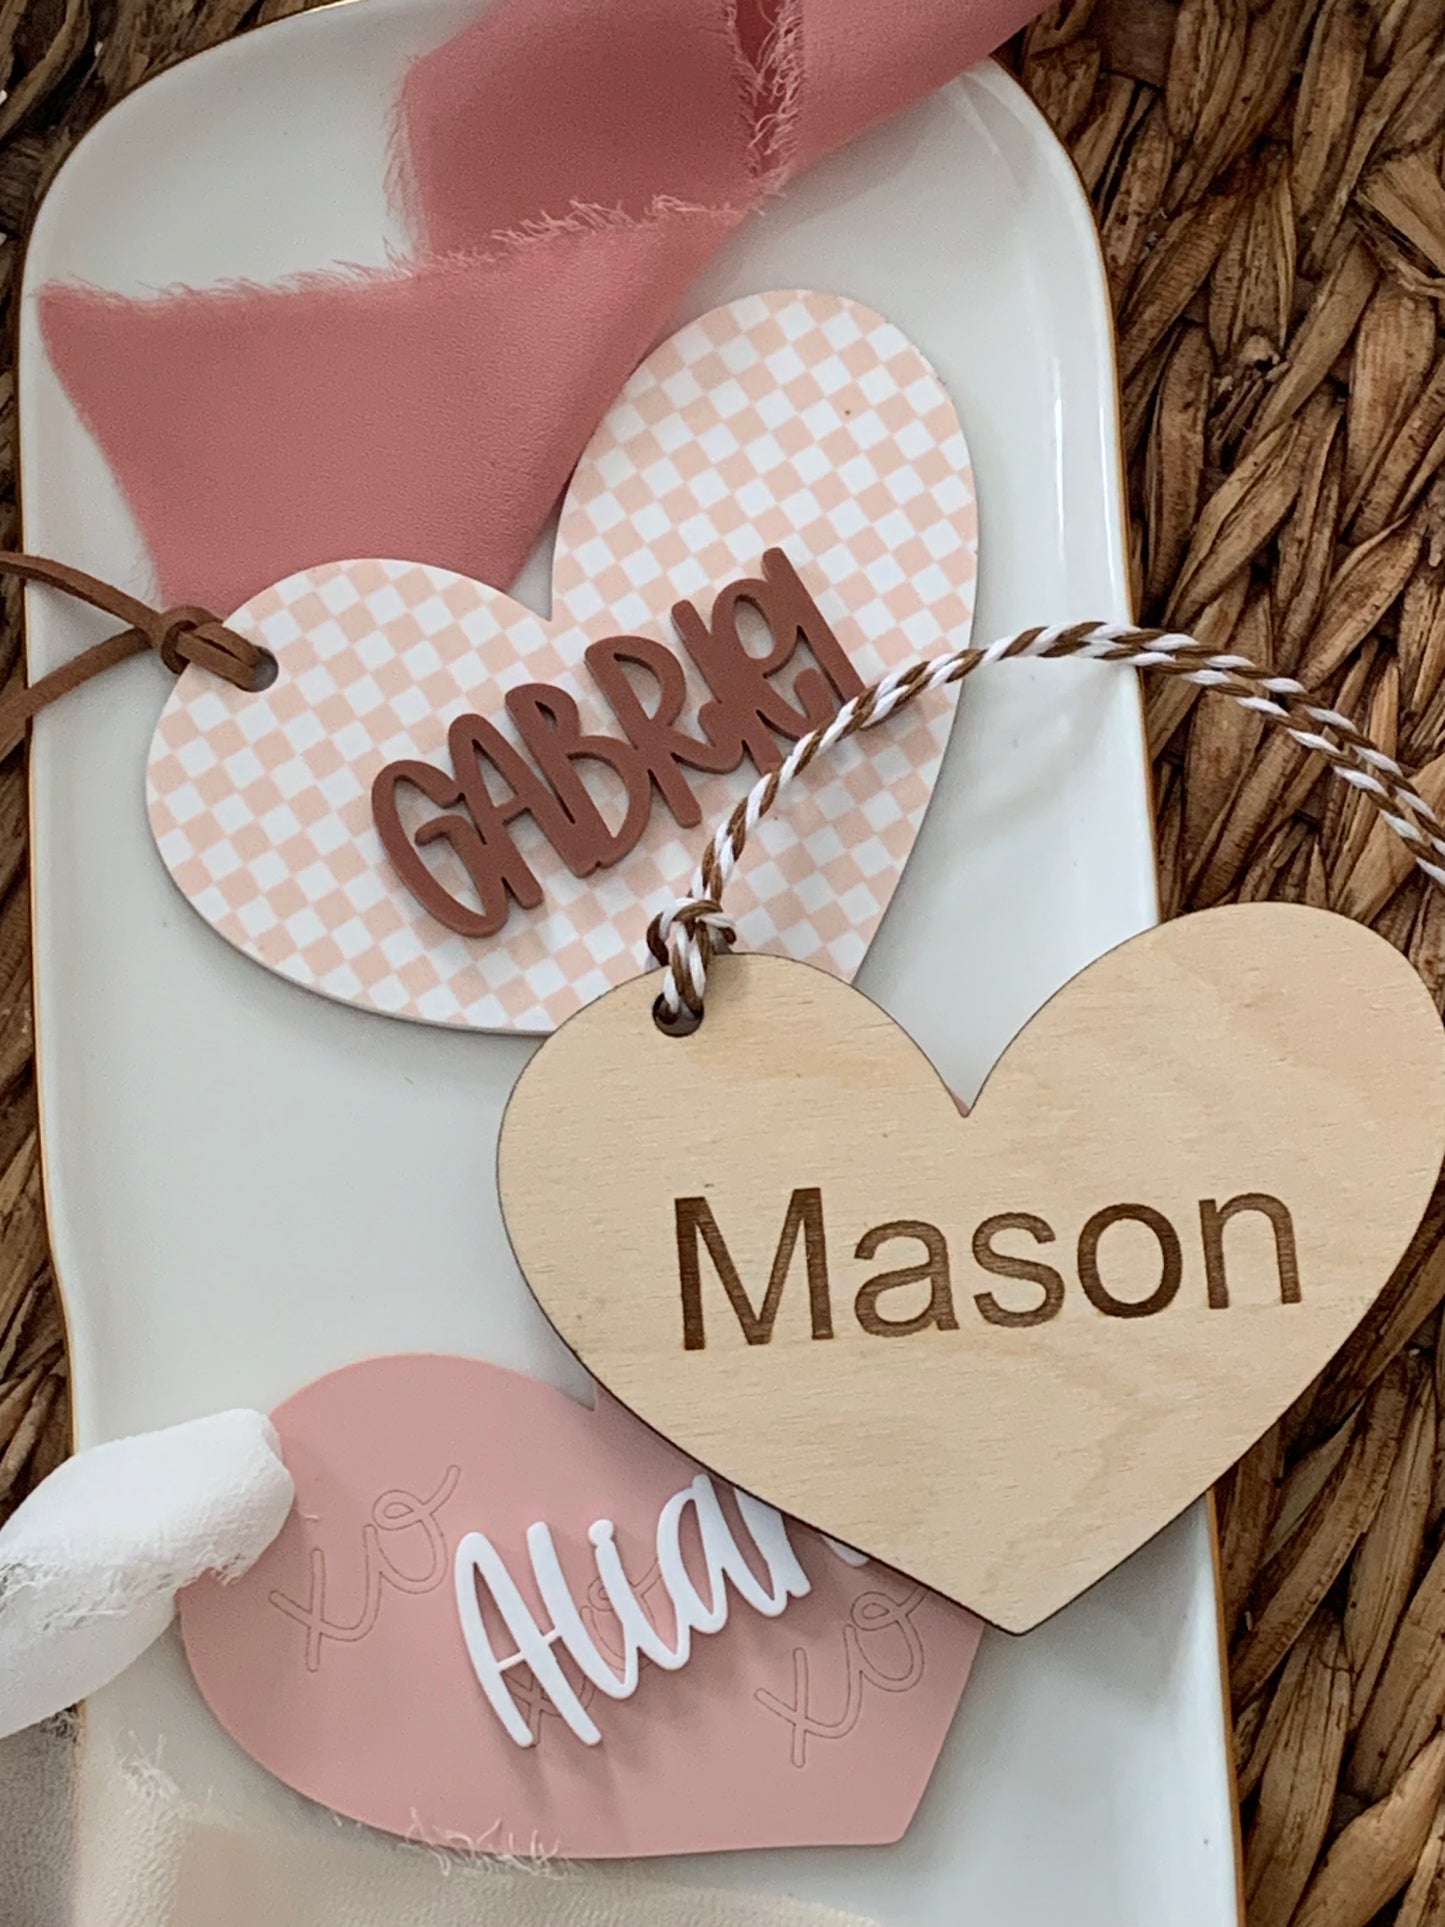 Valentine’s Day Heart Tags